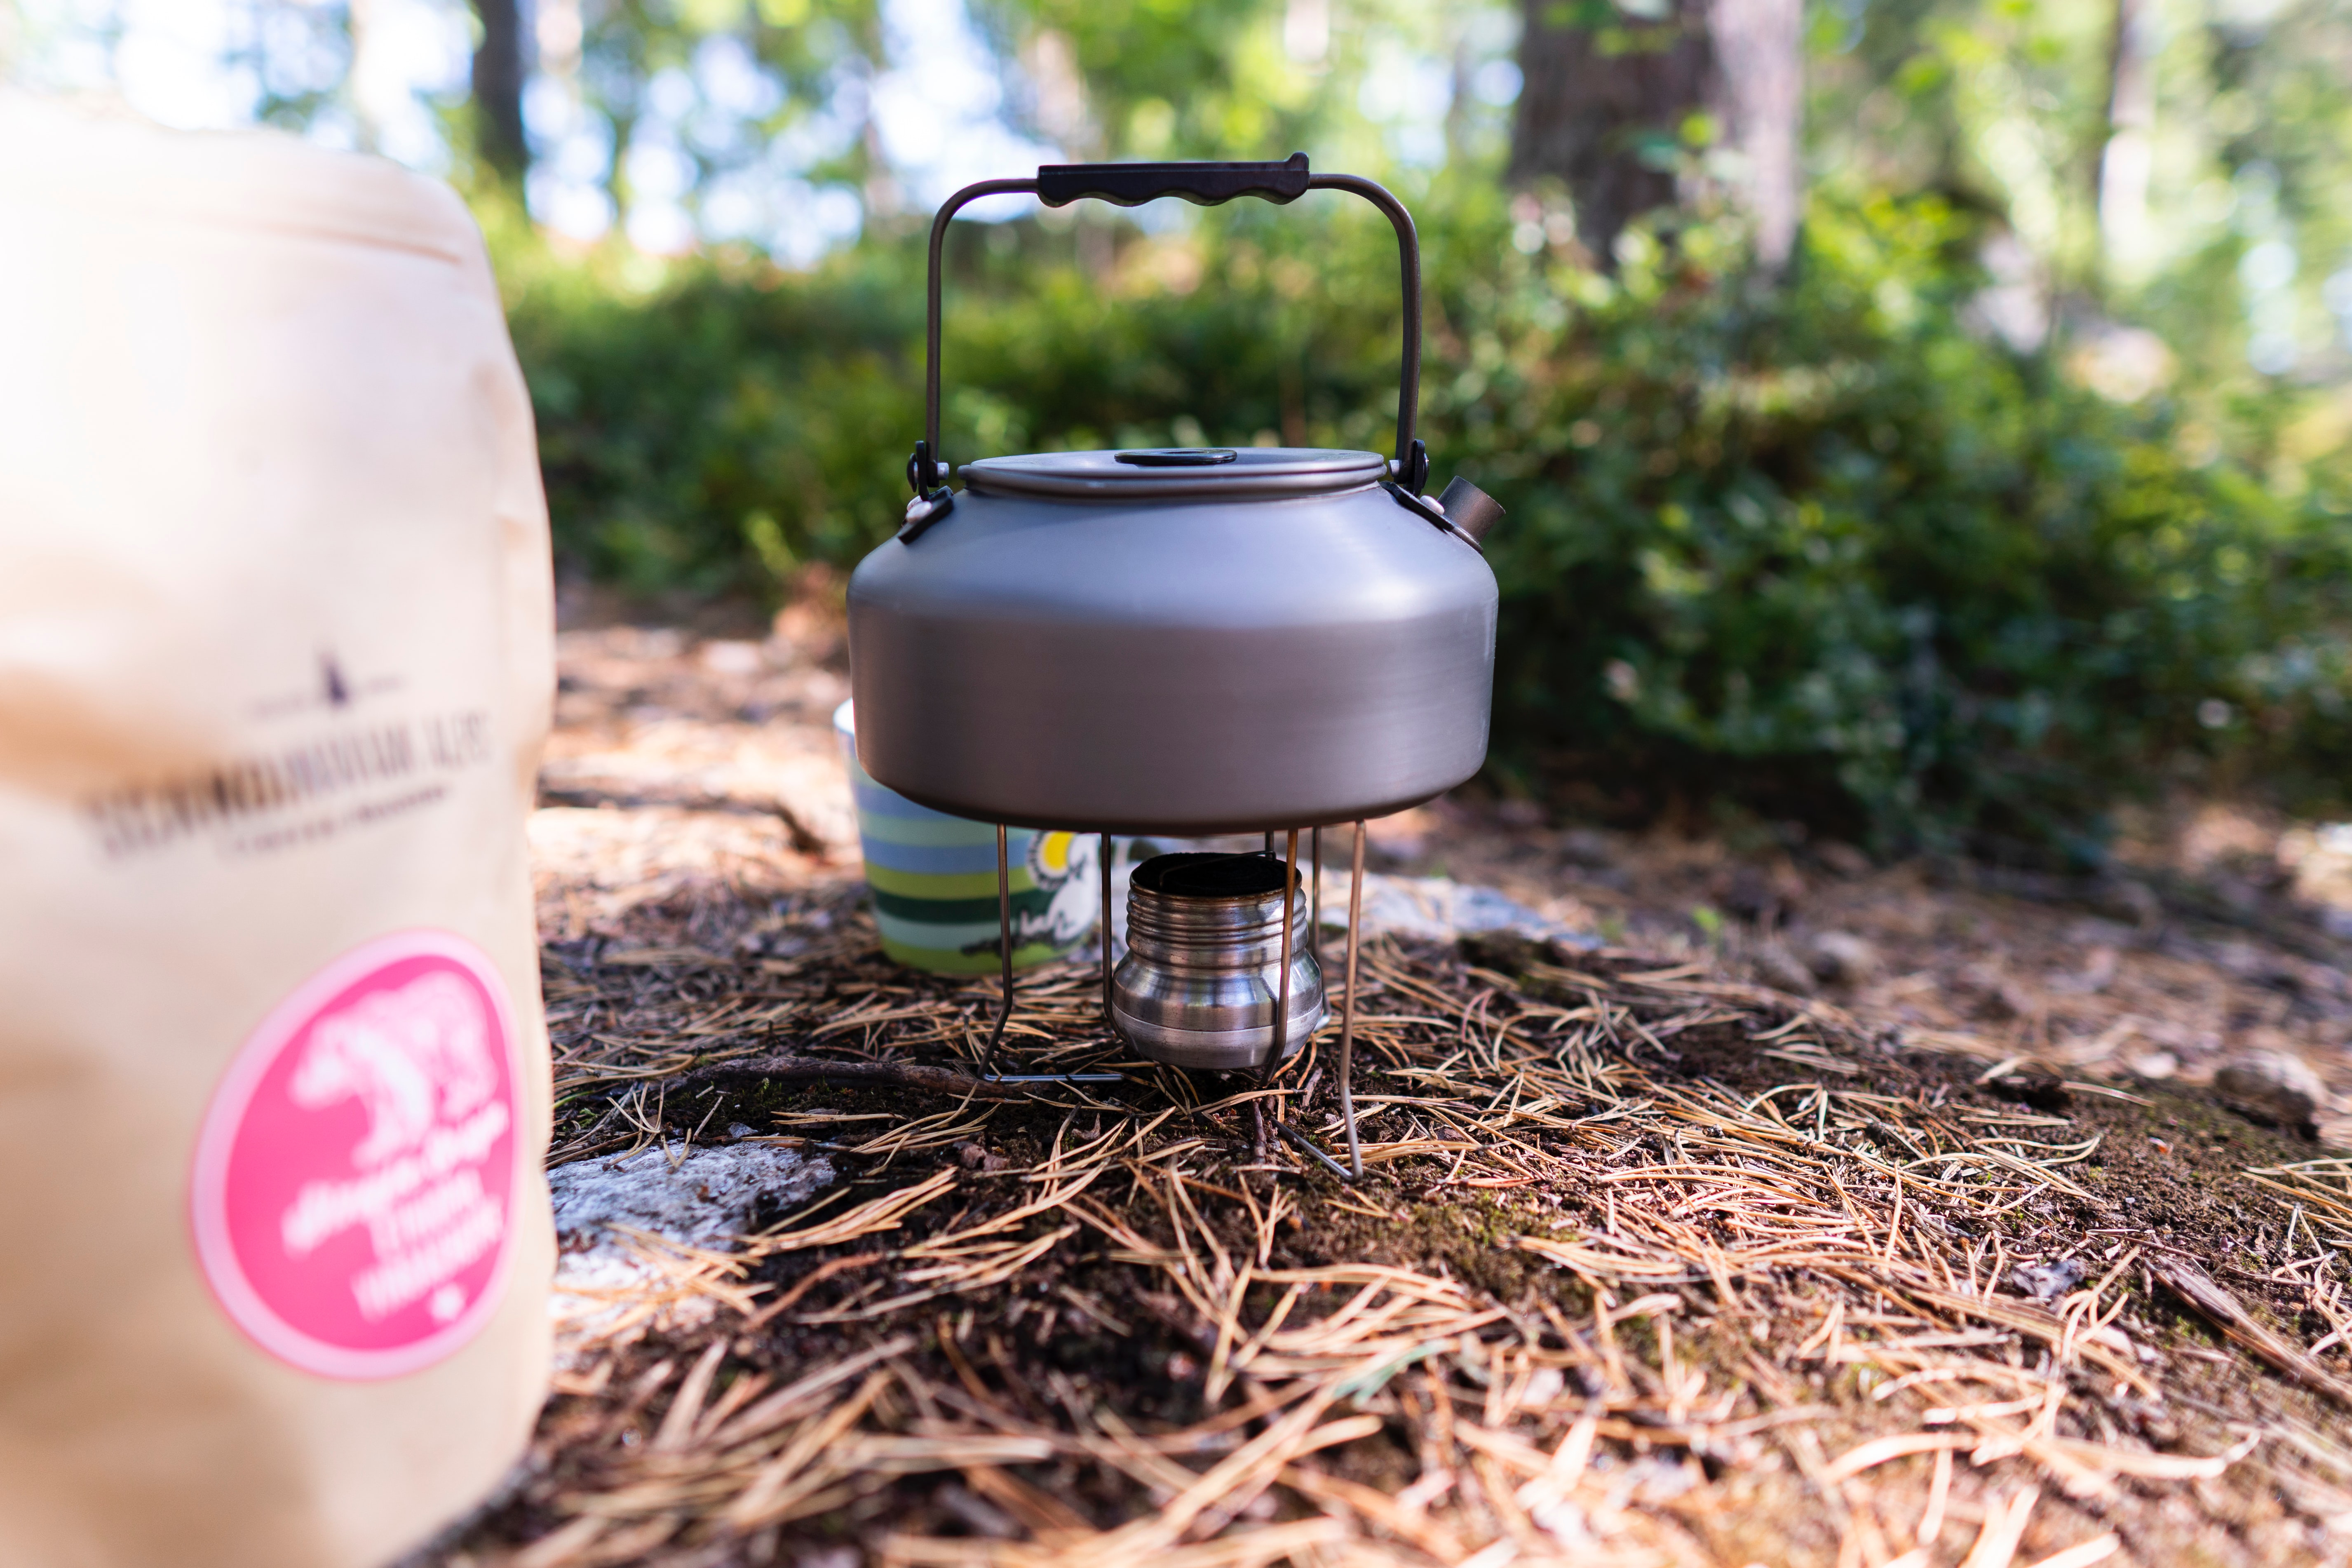 Top 5 Best Camping Kettle in 2022 